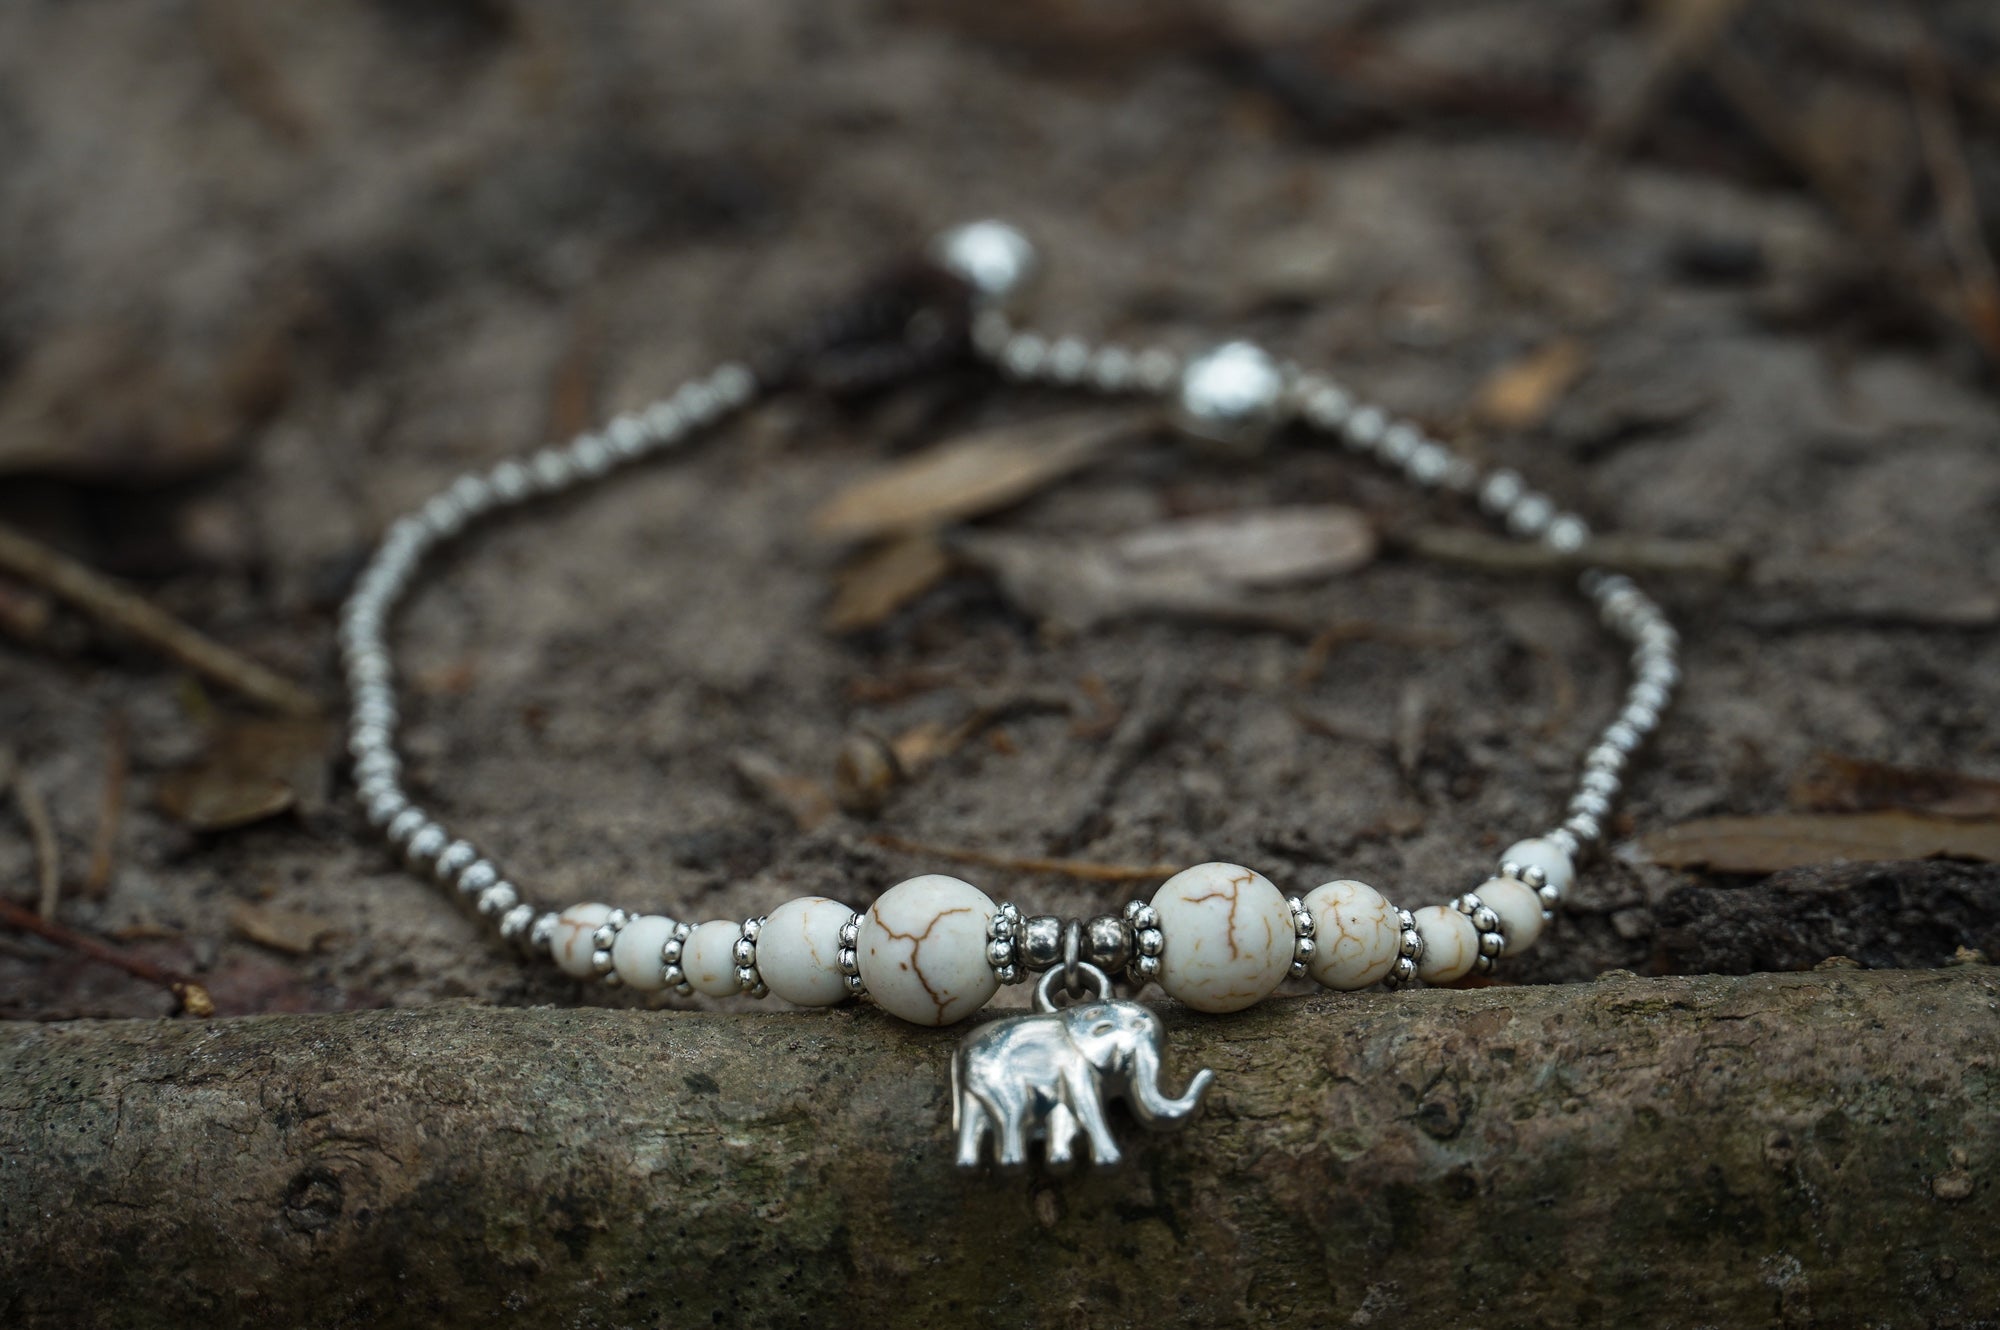 Handcrafted Elephant Boho Silver Anklet - Hypoallergenic Thai Artisan Jewelry - Other Accessories - Bijou Her -  -  - 